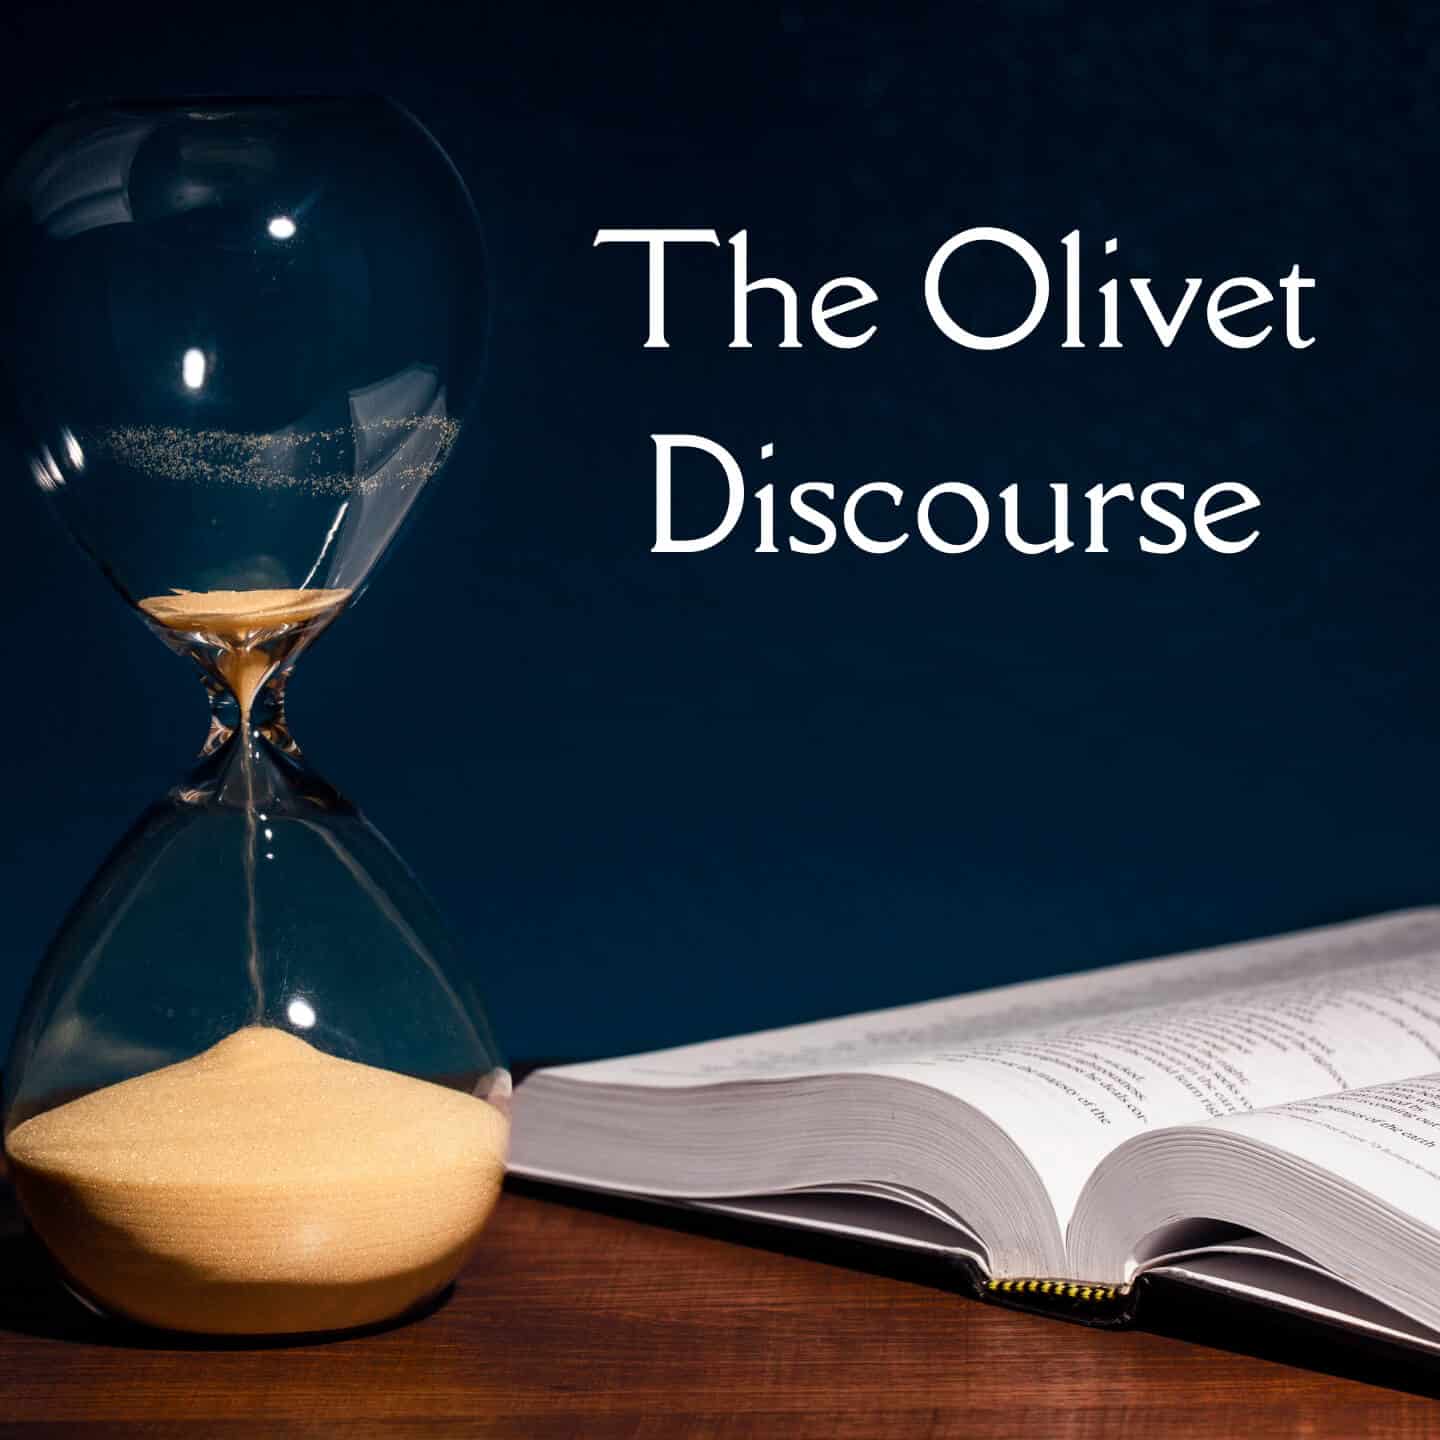 The Olivet Discourse